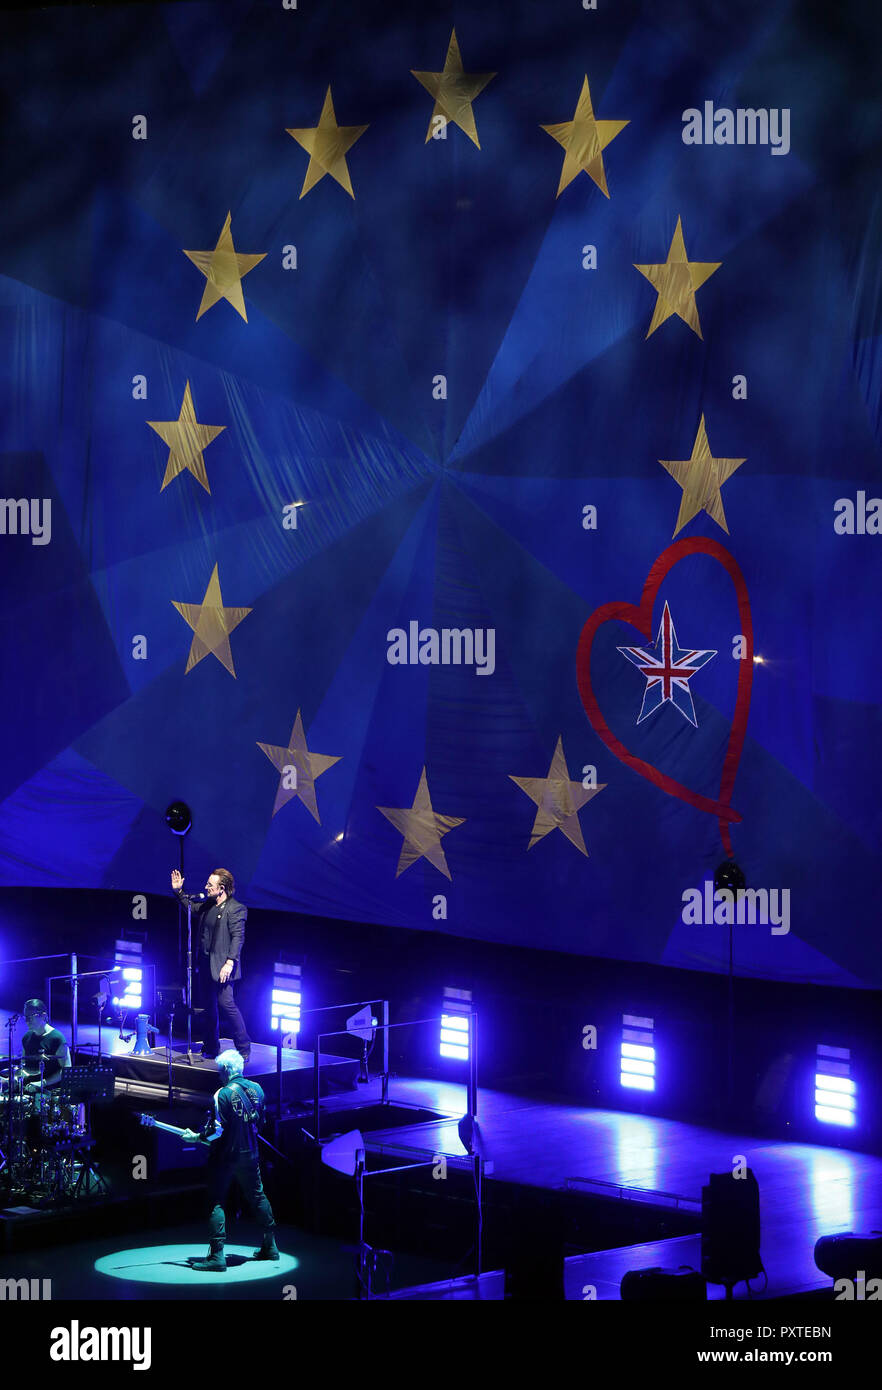 U2 perform in front of a giant EU flag, with one star as the Union Flag, at the o2 Arena in London, during their eXPERIENCE + iNNOCENCE Tour. Stock Photo